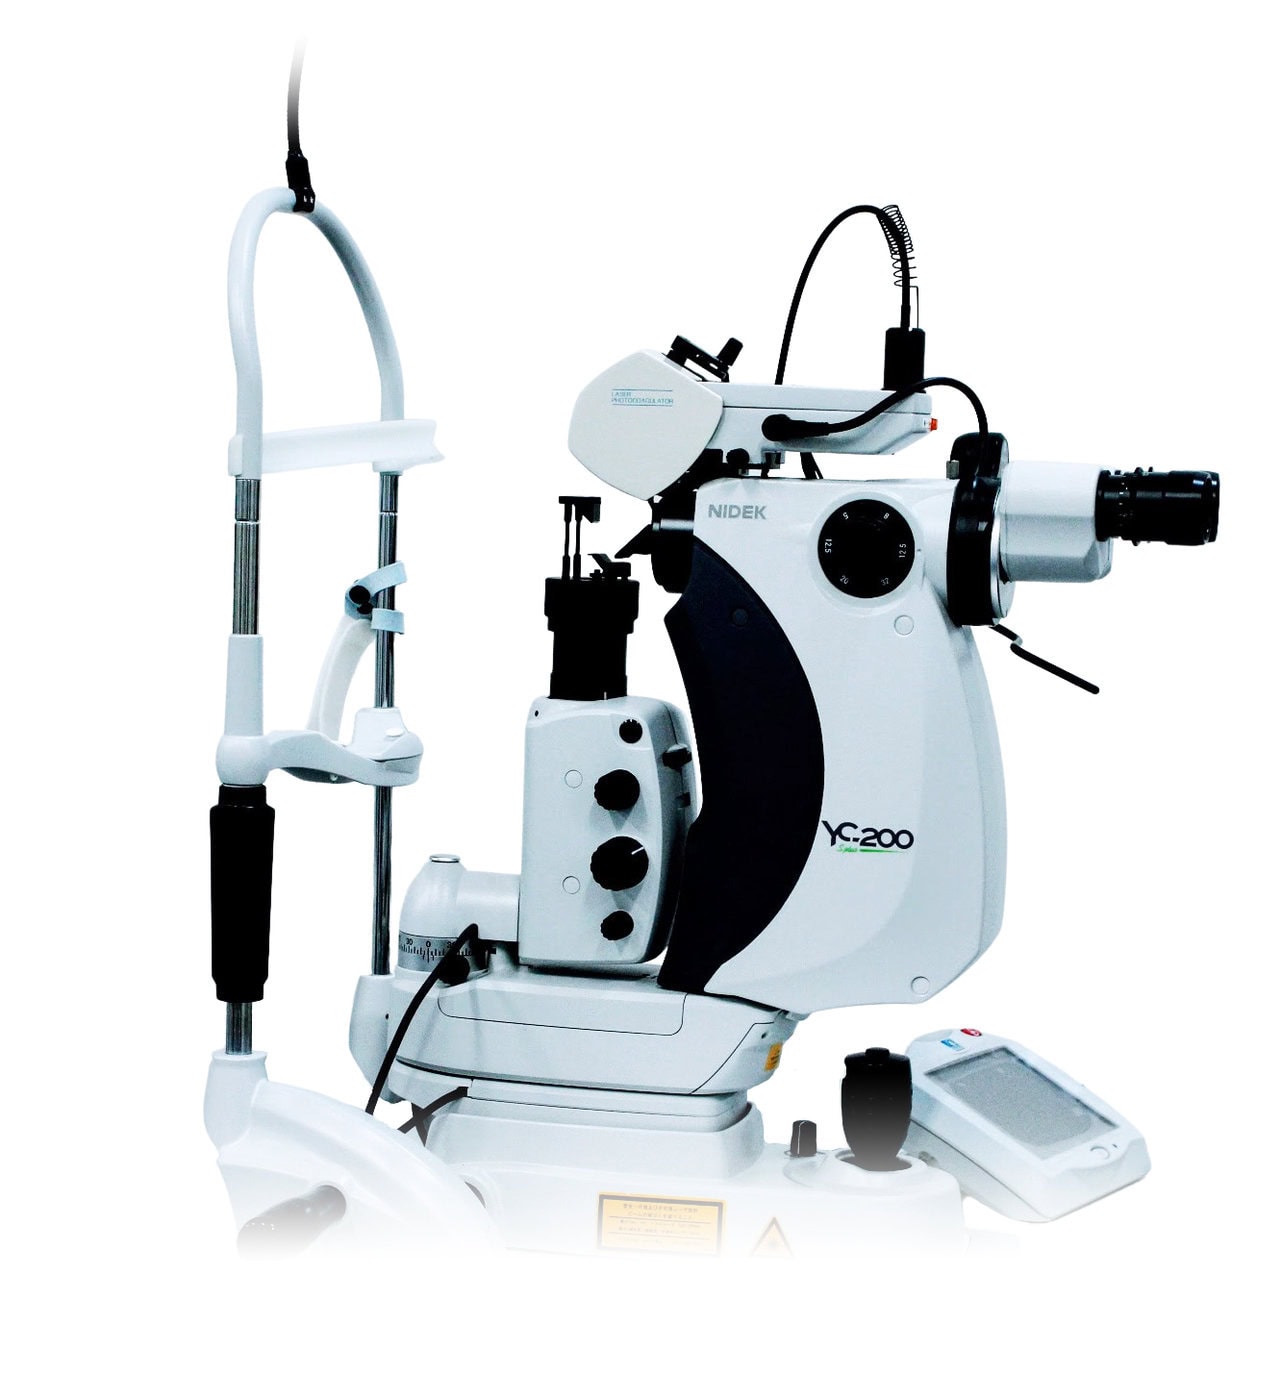 A Nidek Medical Device, Identified As The Yc-200, Is Used For Ophthalmic Procedures. The Machine Features A Binocular Eyepiece, Various Control Knobs, And A Laser Component. It Is White With Black Accents And Has Several Cables Attached.